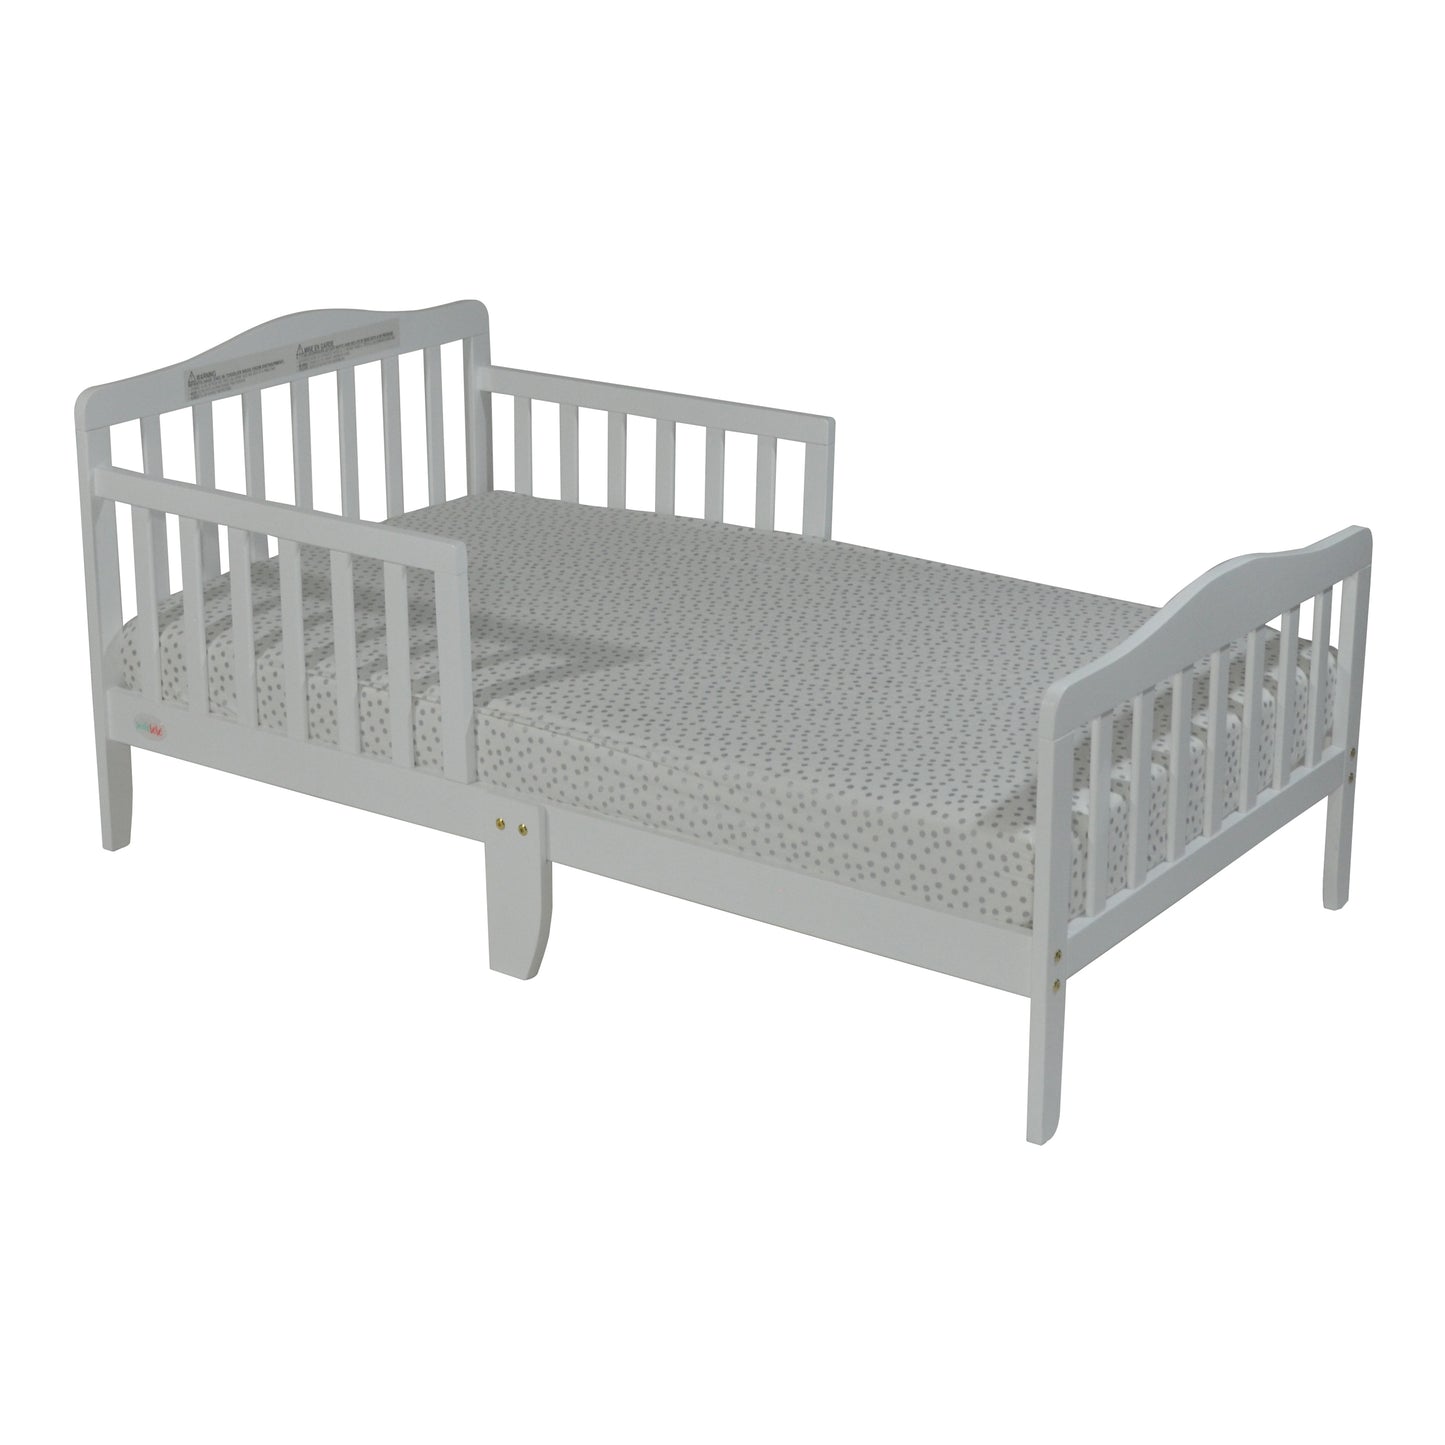 Blaire Toddler Bed White